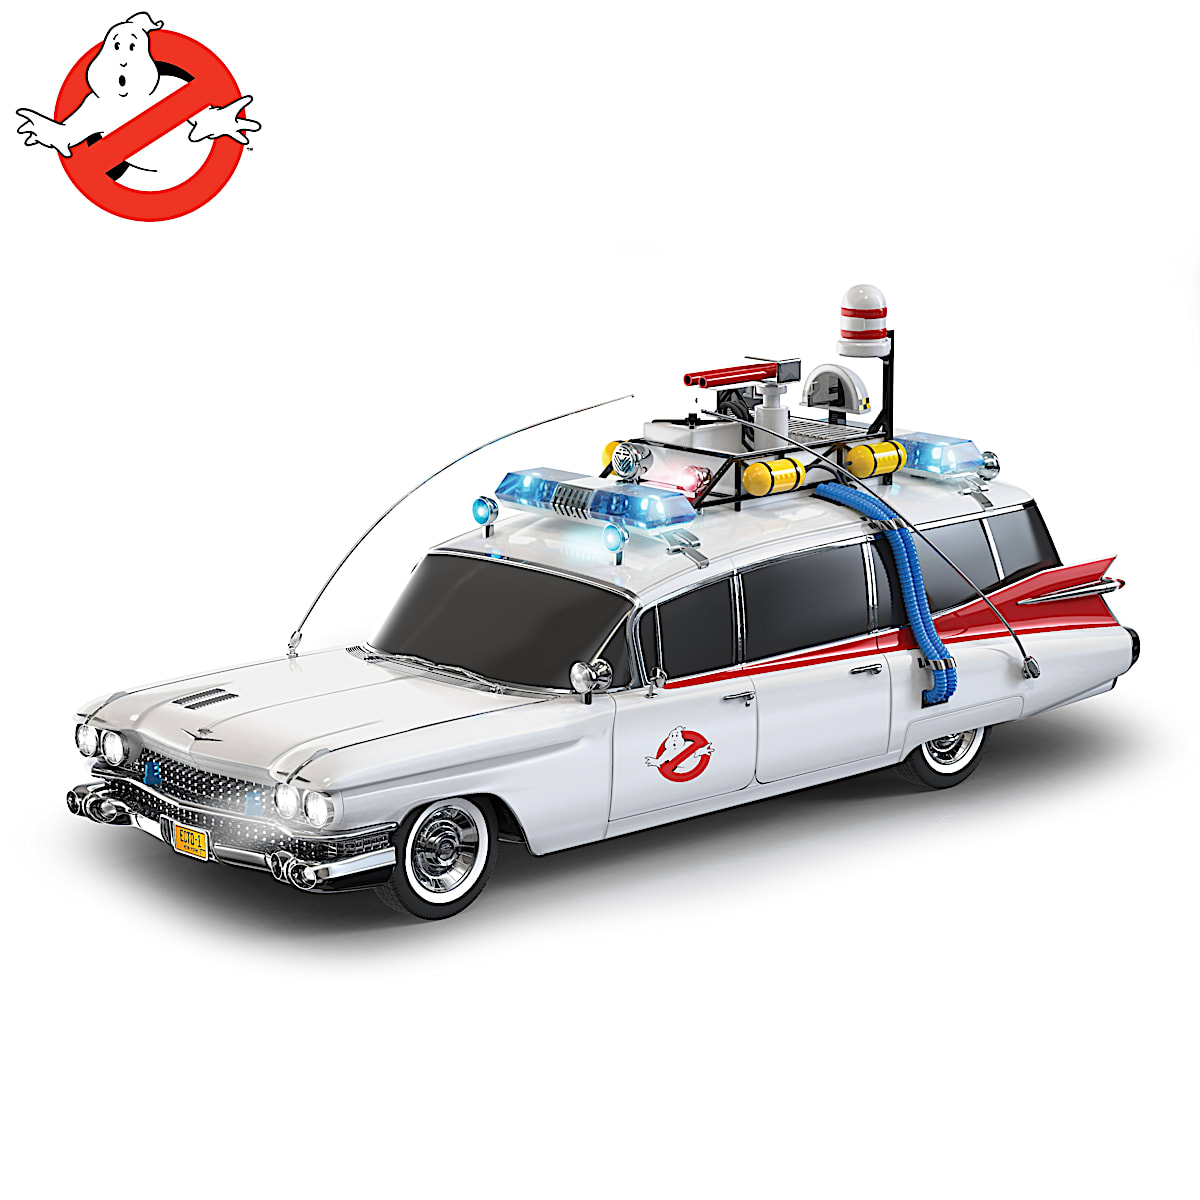 Ghostbusters Ecto-1 Sculpture